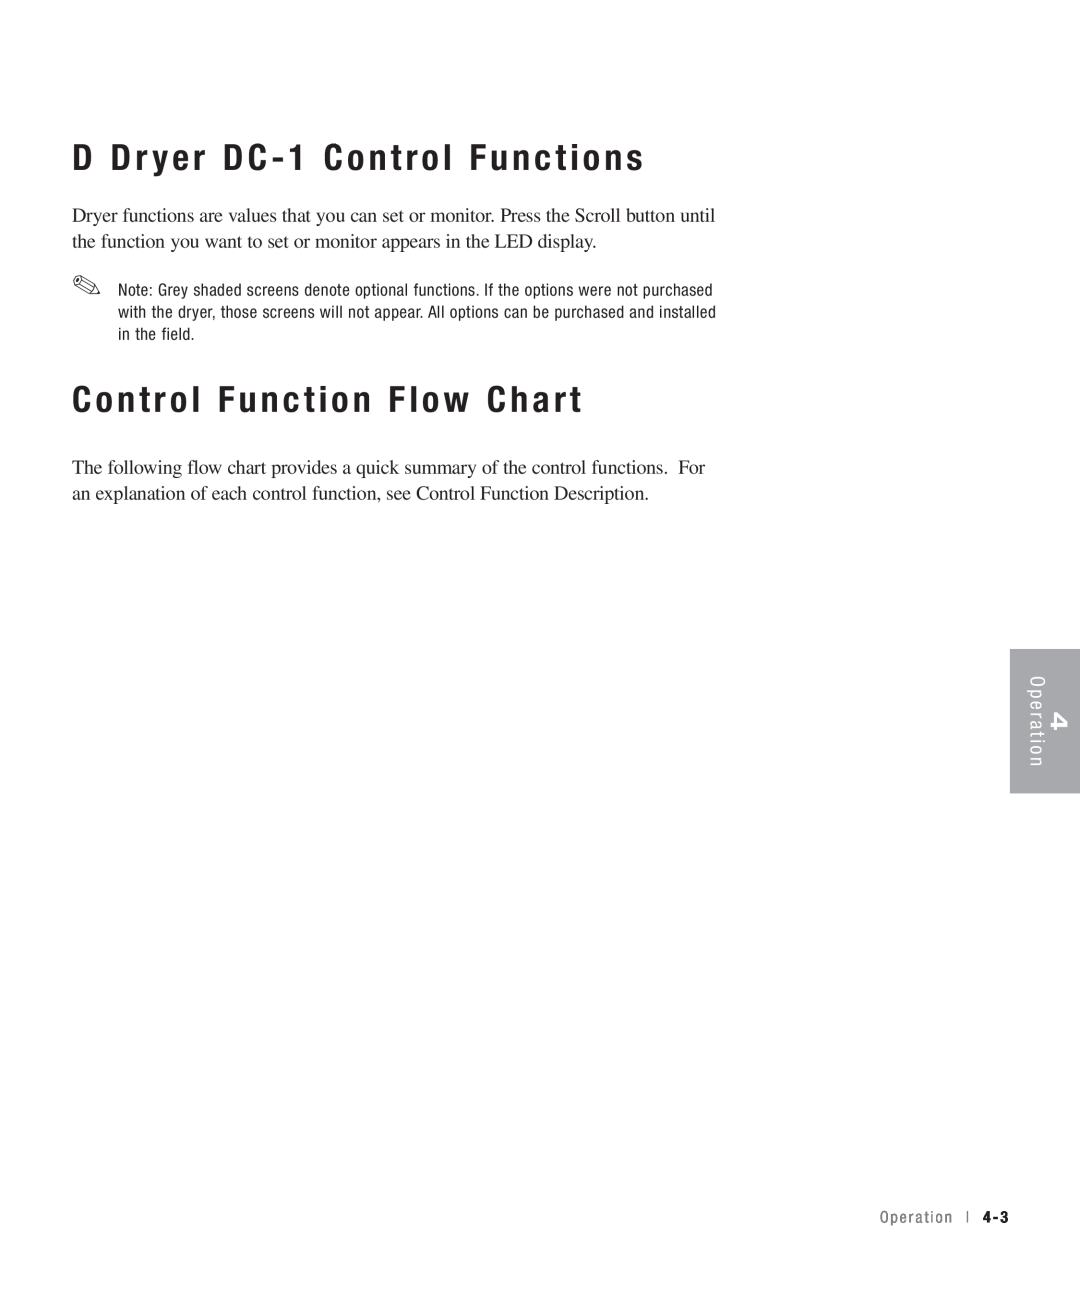 Conair 100, 25, 15, 50 D Dr yer DC - 1 Control Functions, Control Function Flow Chart, O p e r a t i o n, in the field 